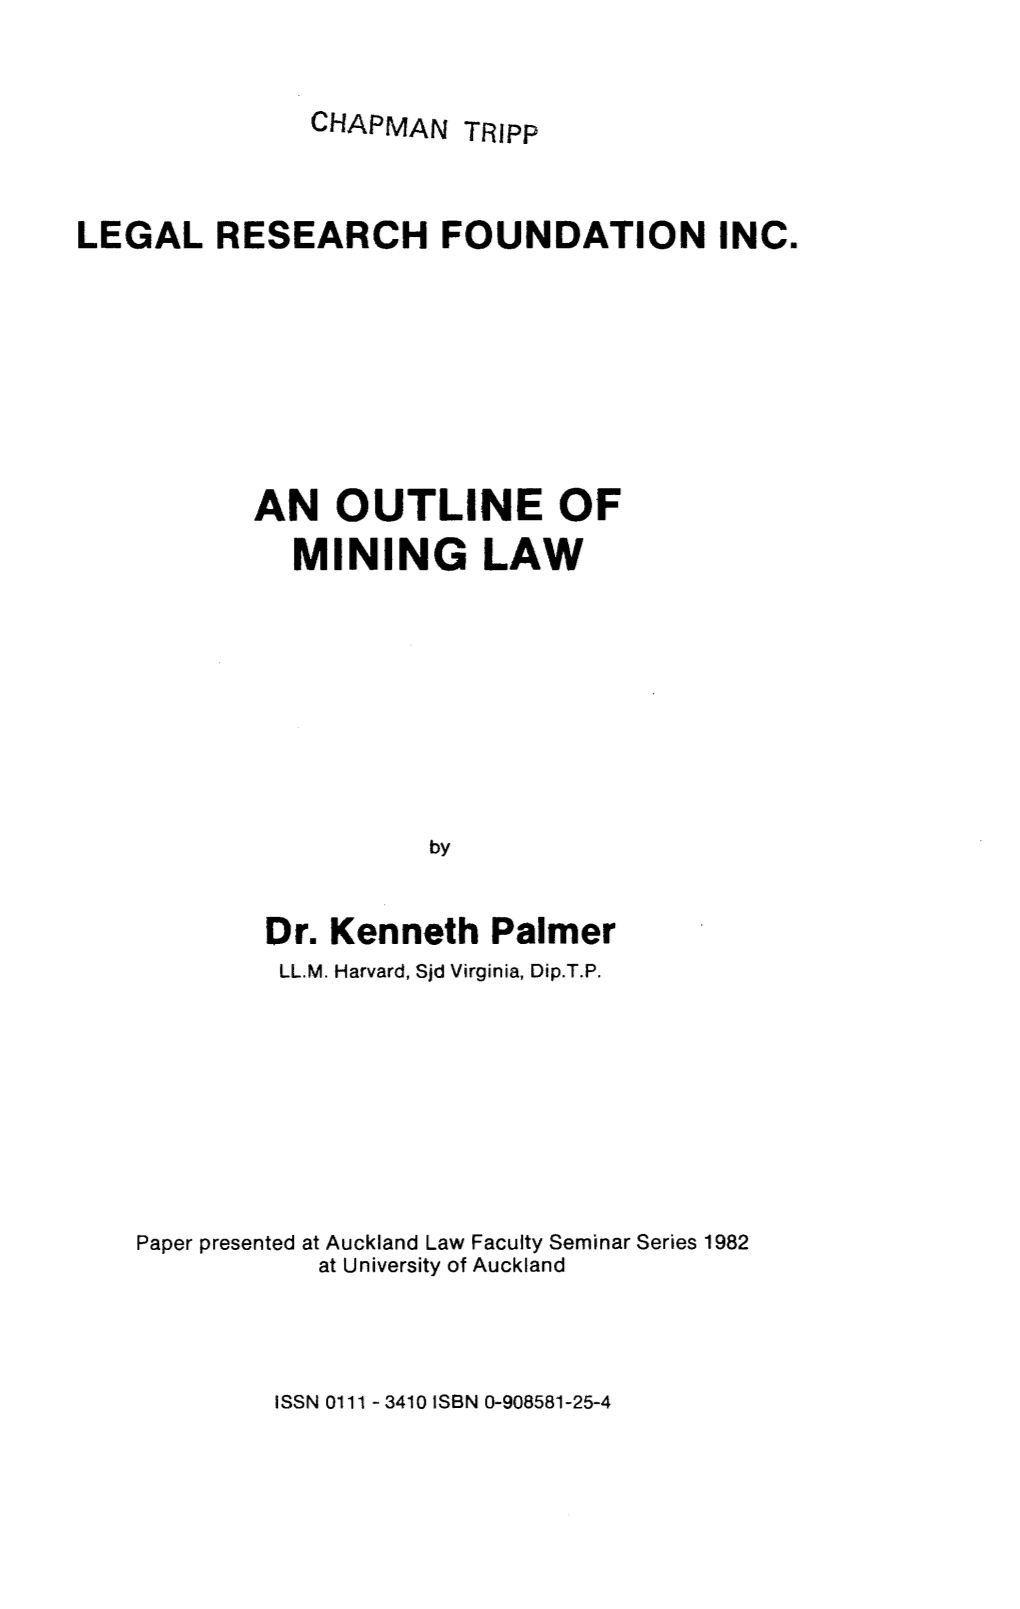 An Outline of Mining Law